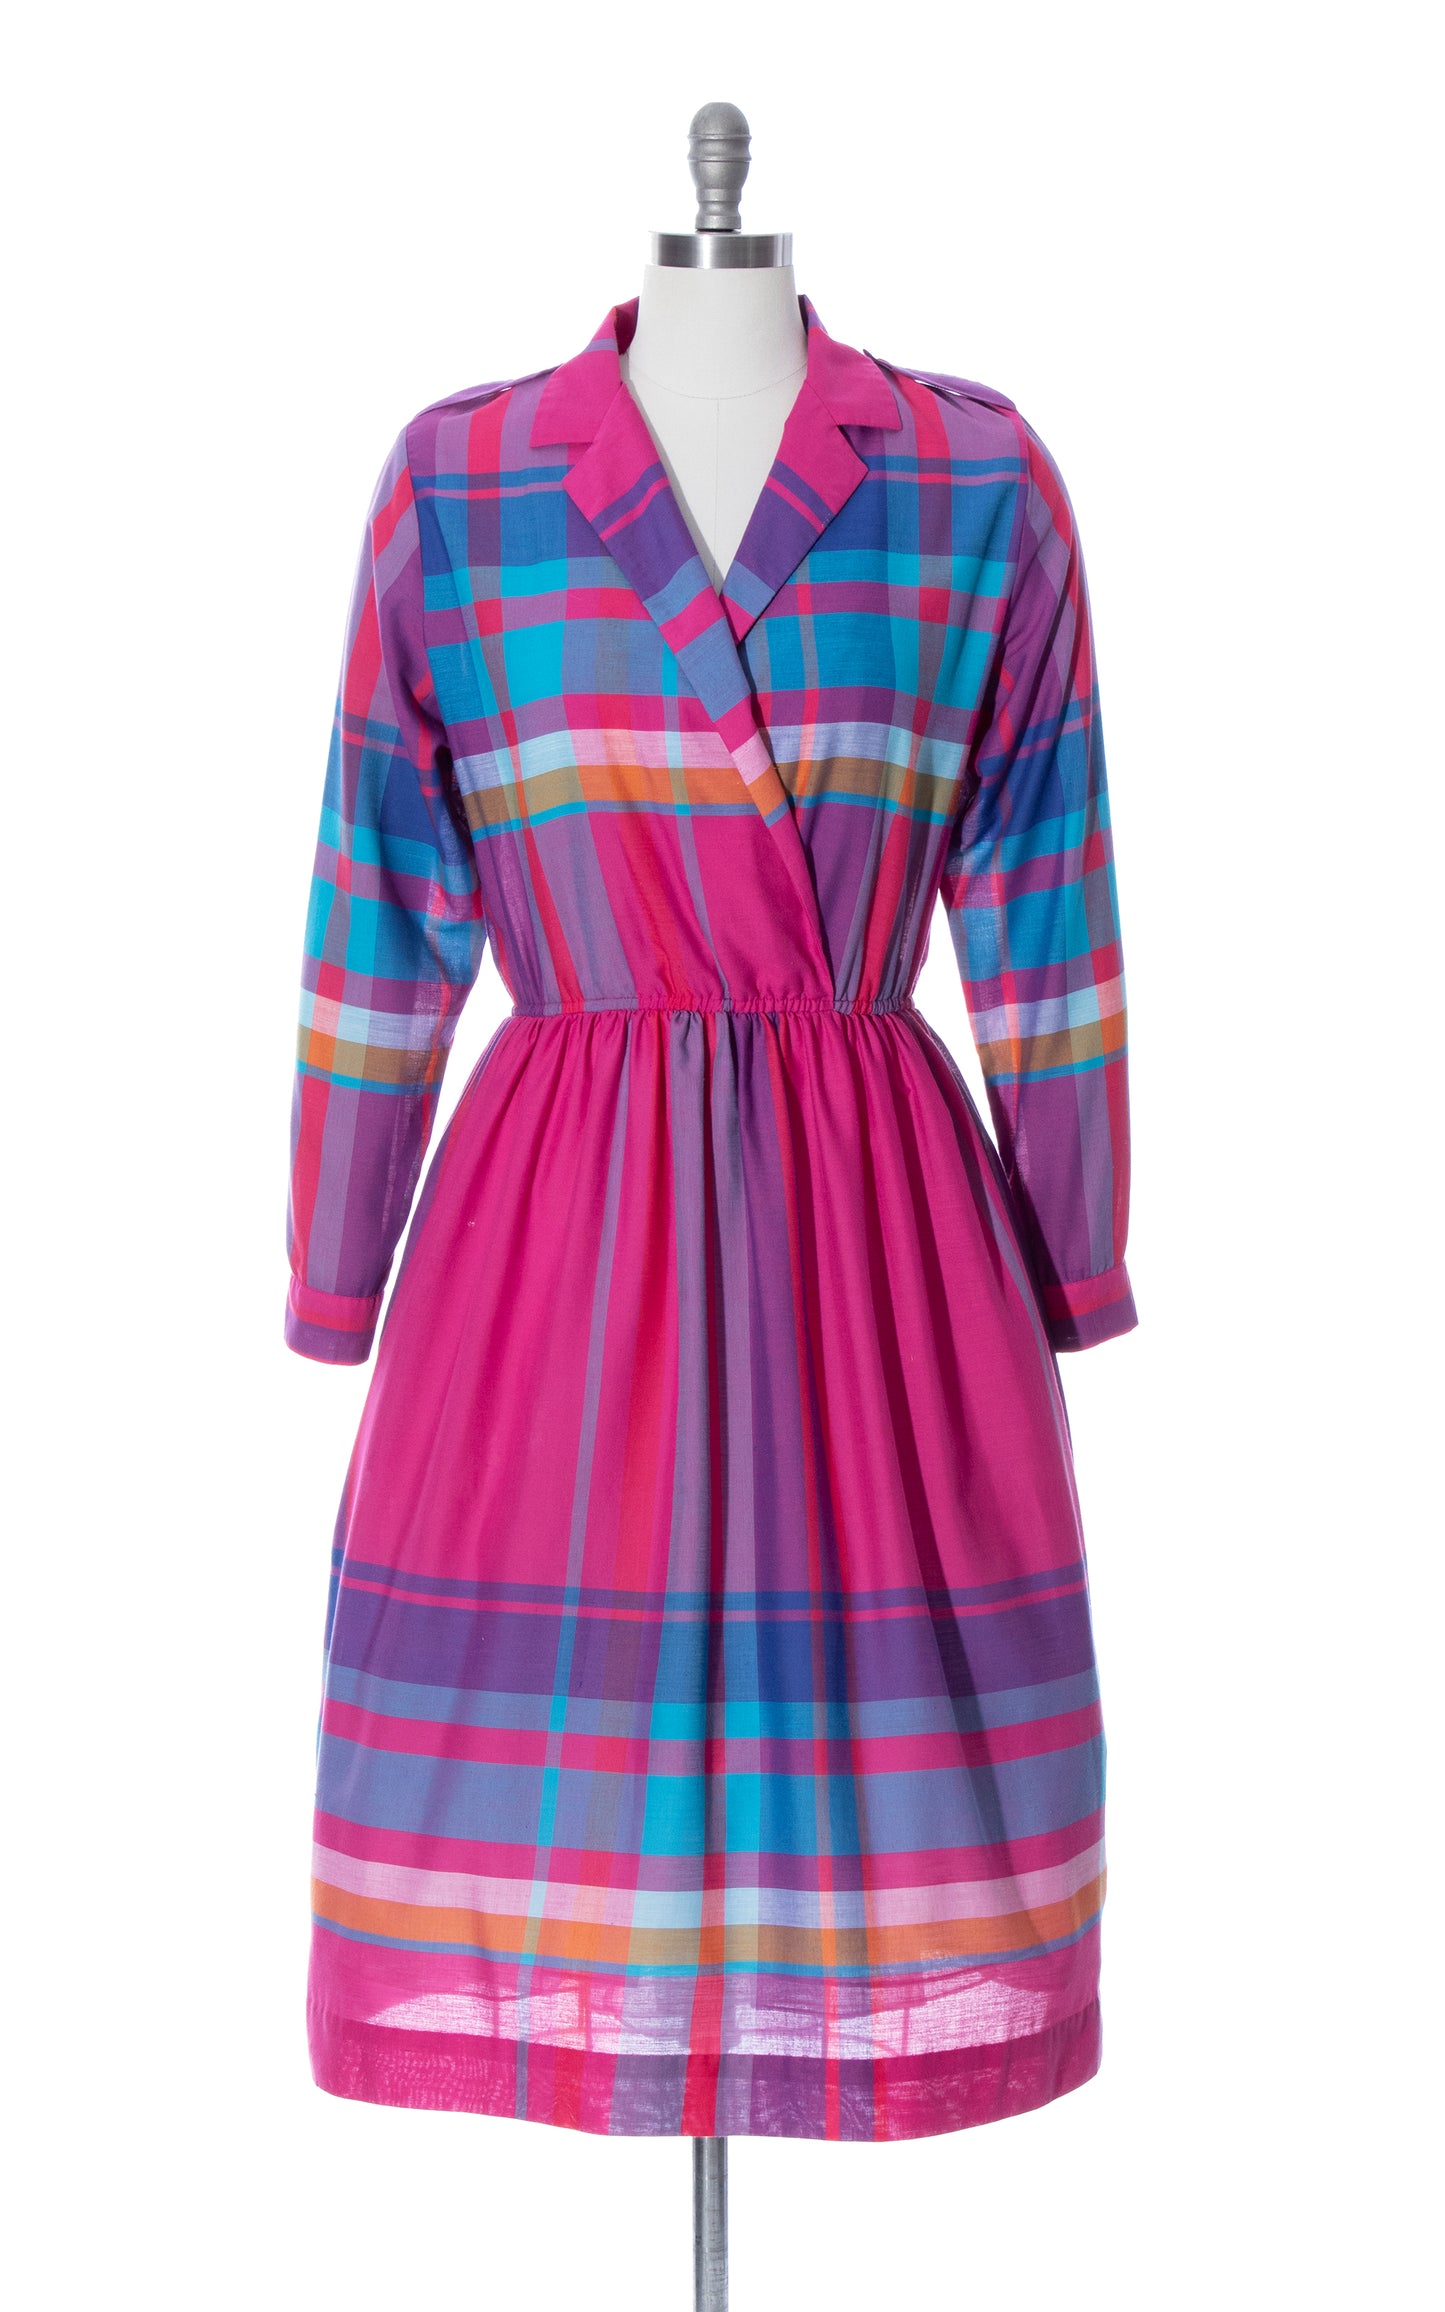 Vintage 80s 1980s does 1950s Style Pink Blue Plaid Cotton Day Dress Birthday Life Vintage